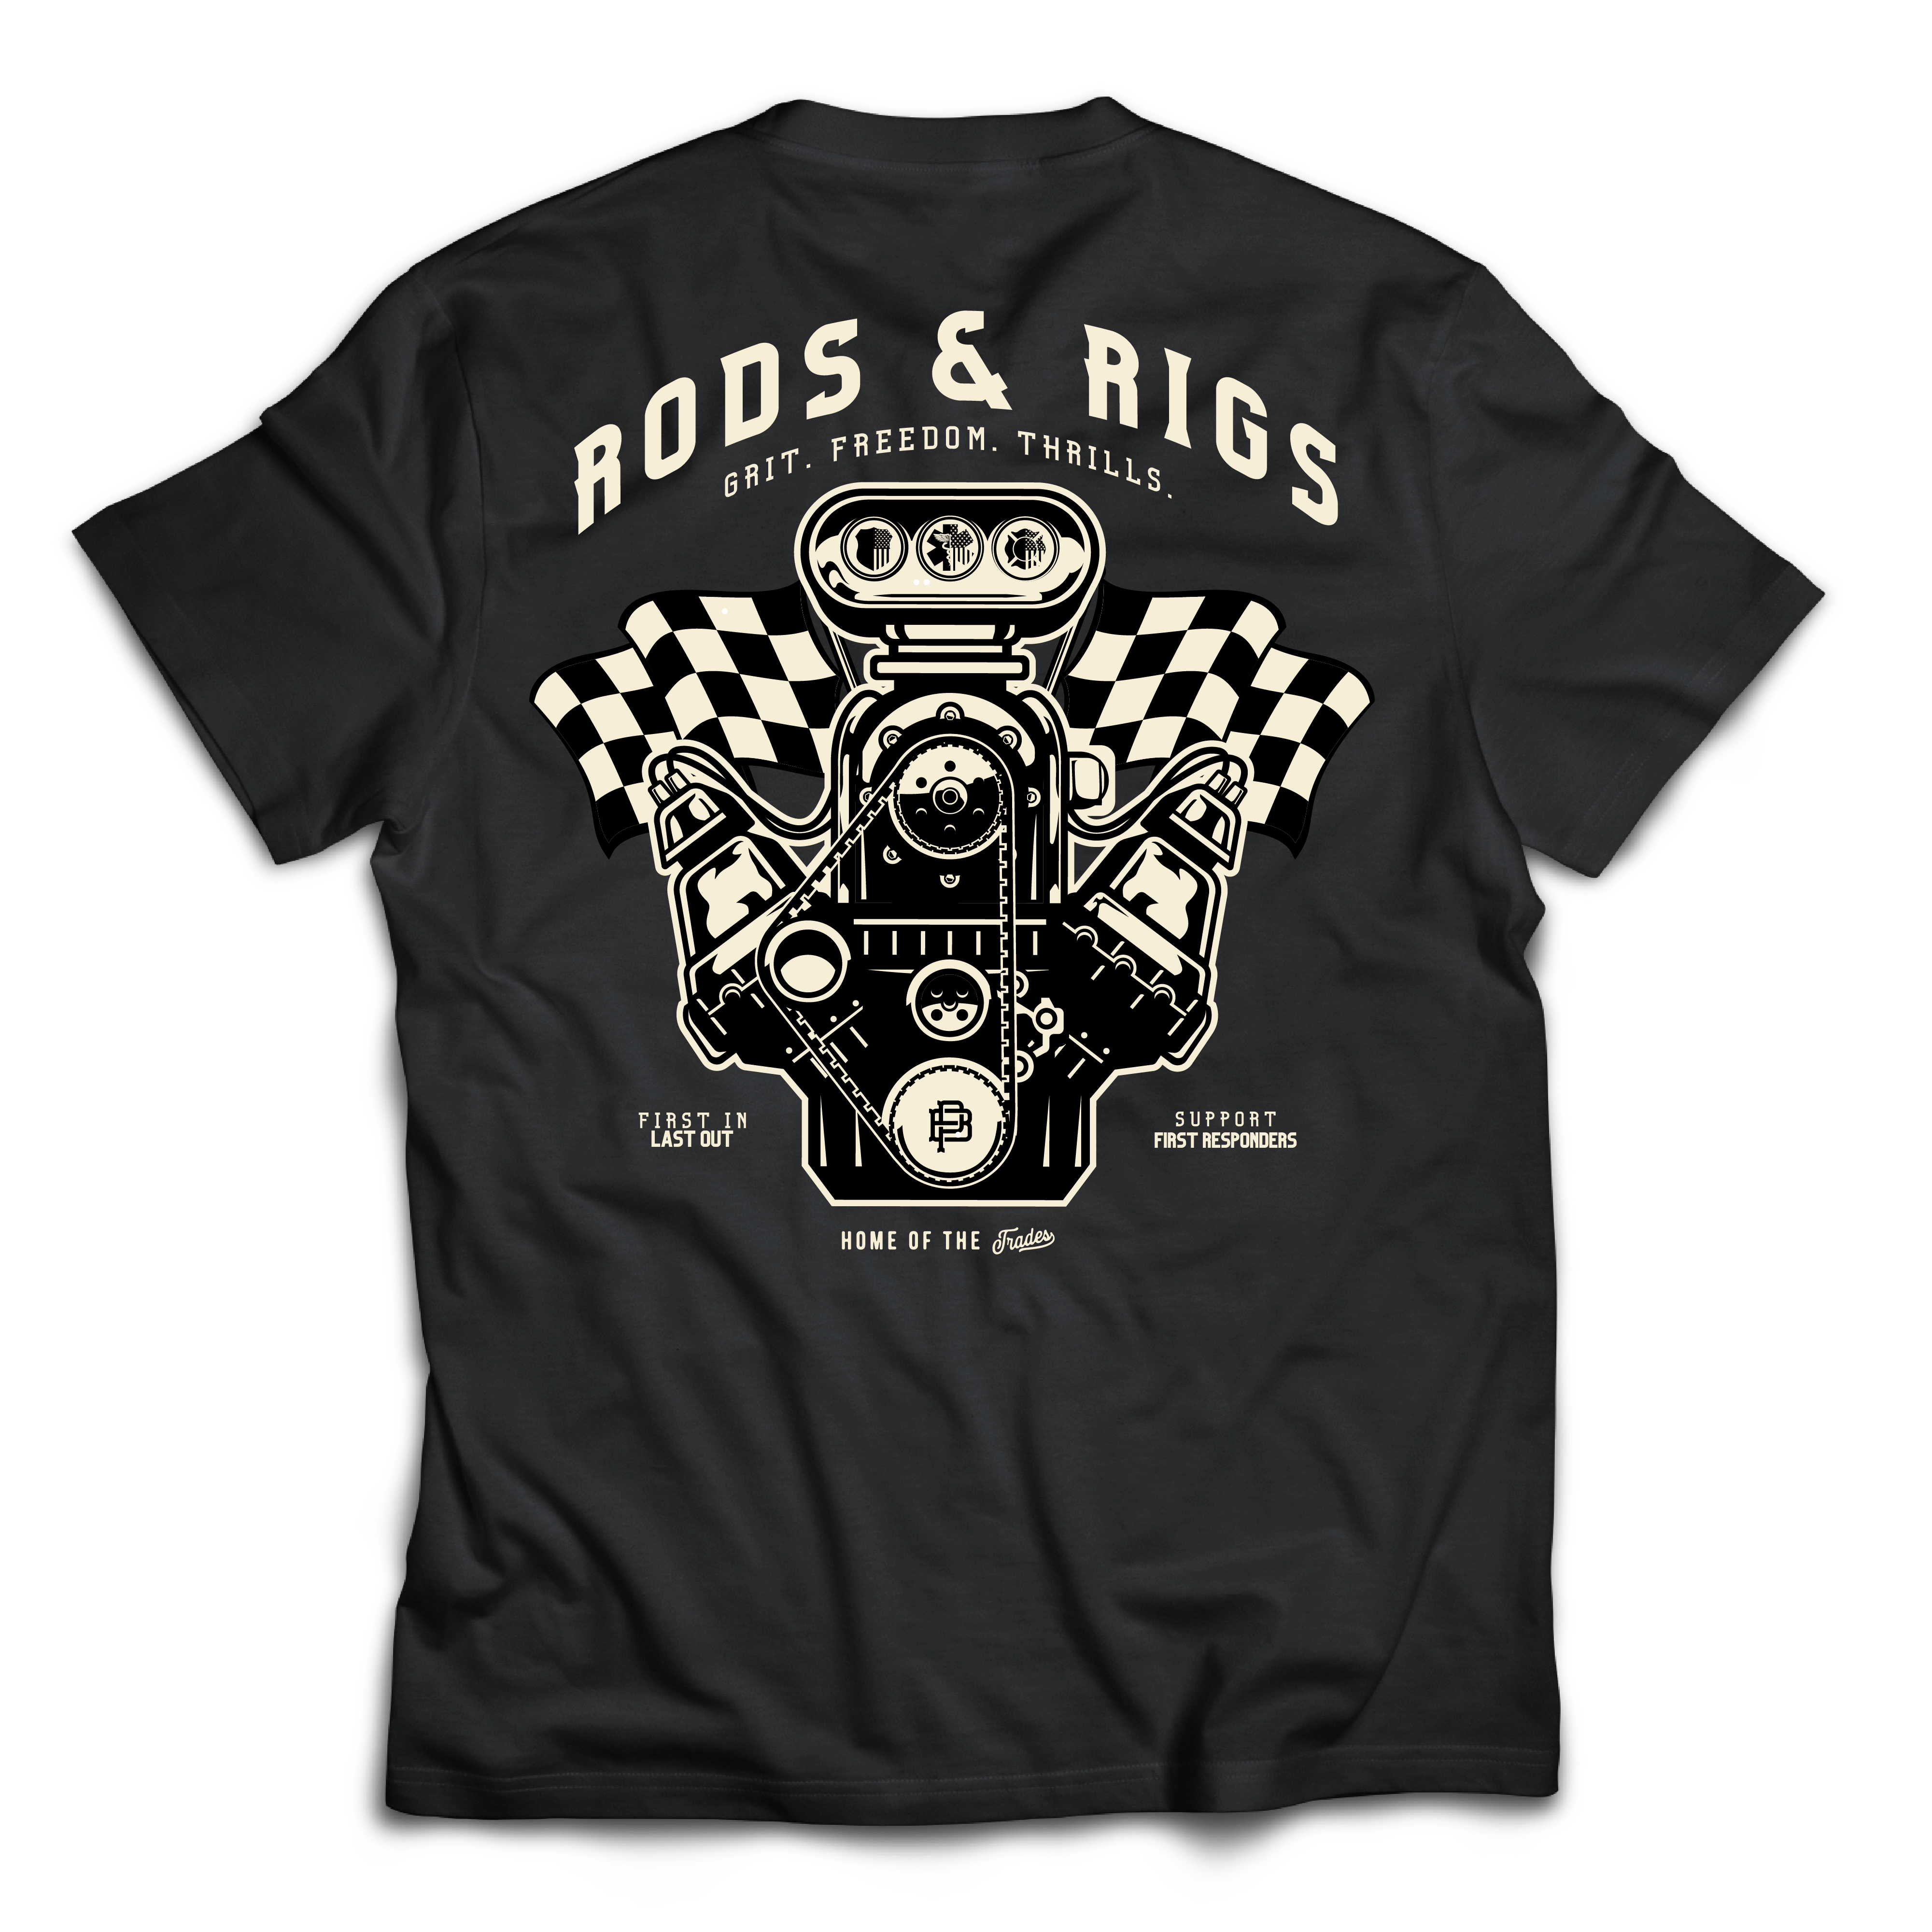 Youth Rods & Rigs Charity Tee, Black